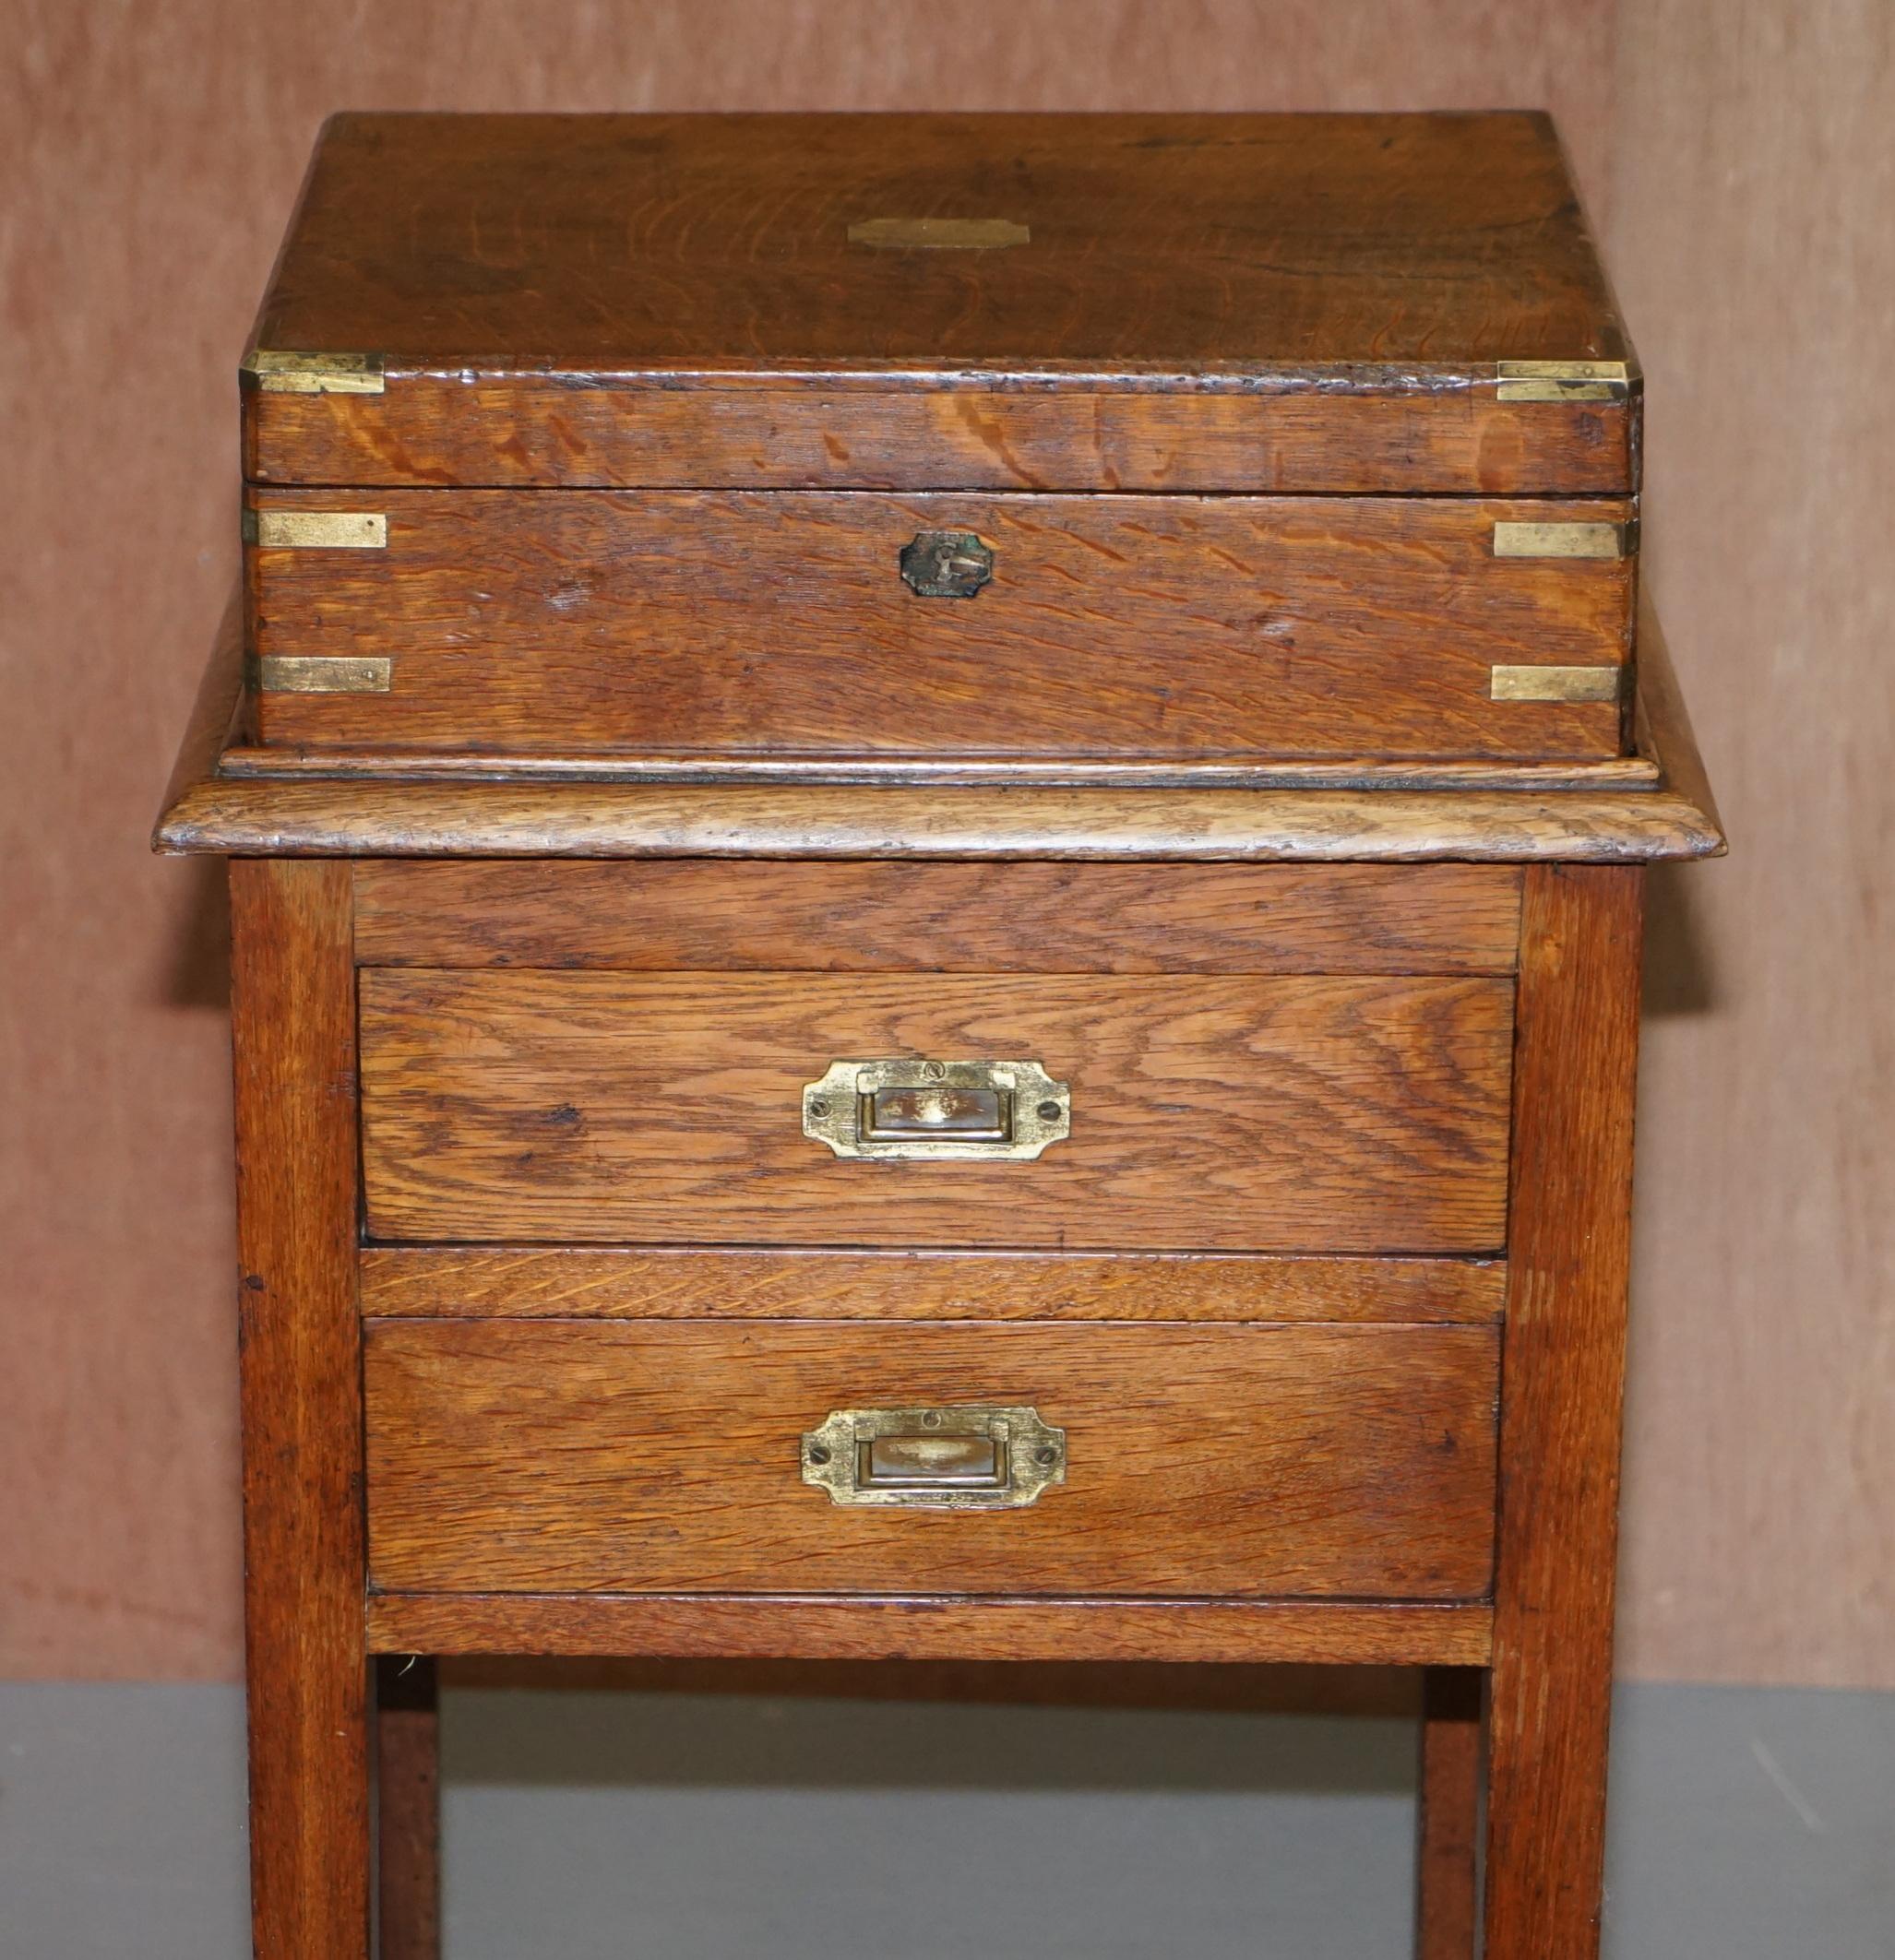 20th Century Original Army & Navy Stamped British Military Campaign Chest on Stand + Drawers